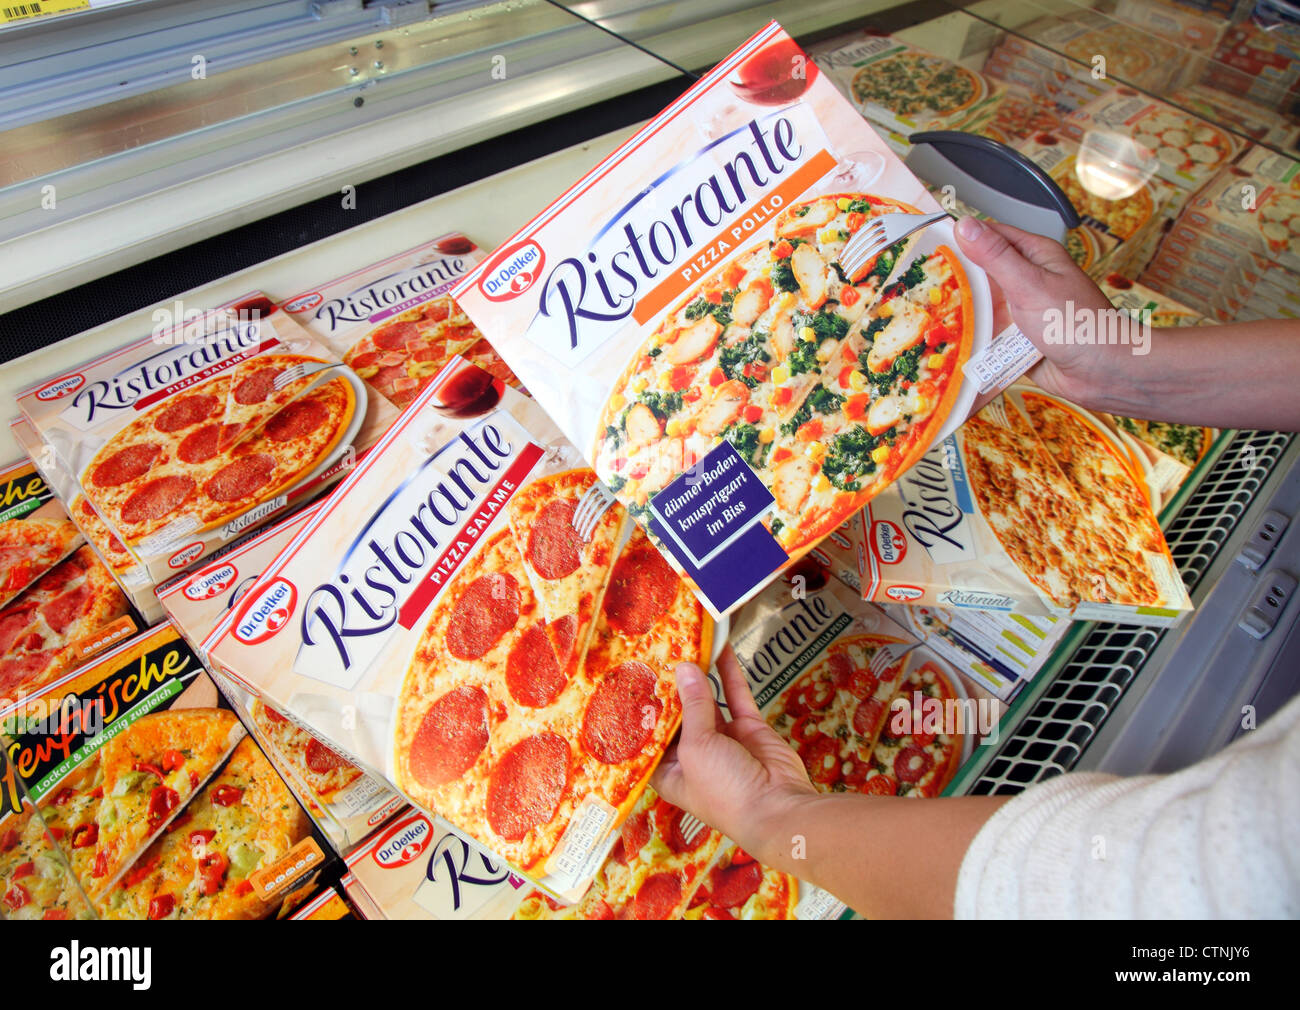 Shopping in a large supermarket. Deep frozen pizza. Stock Photo